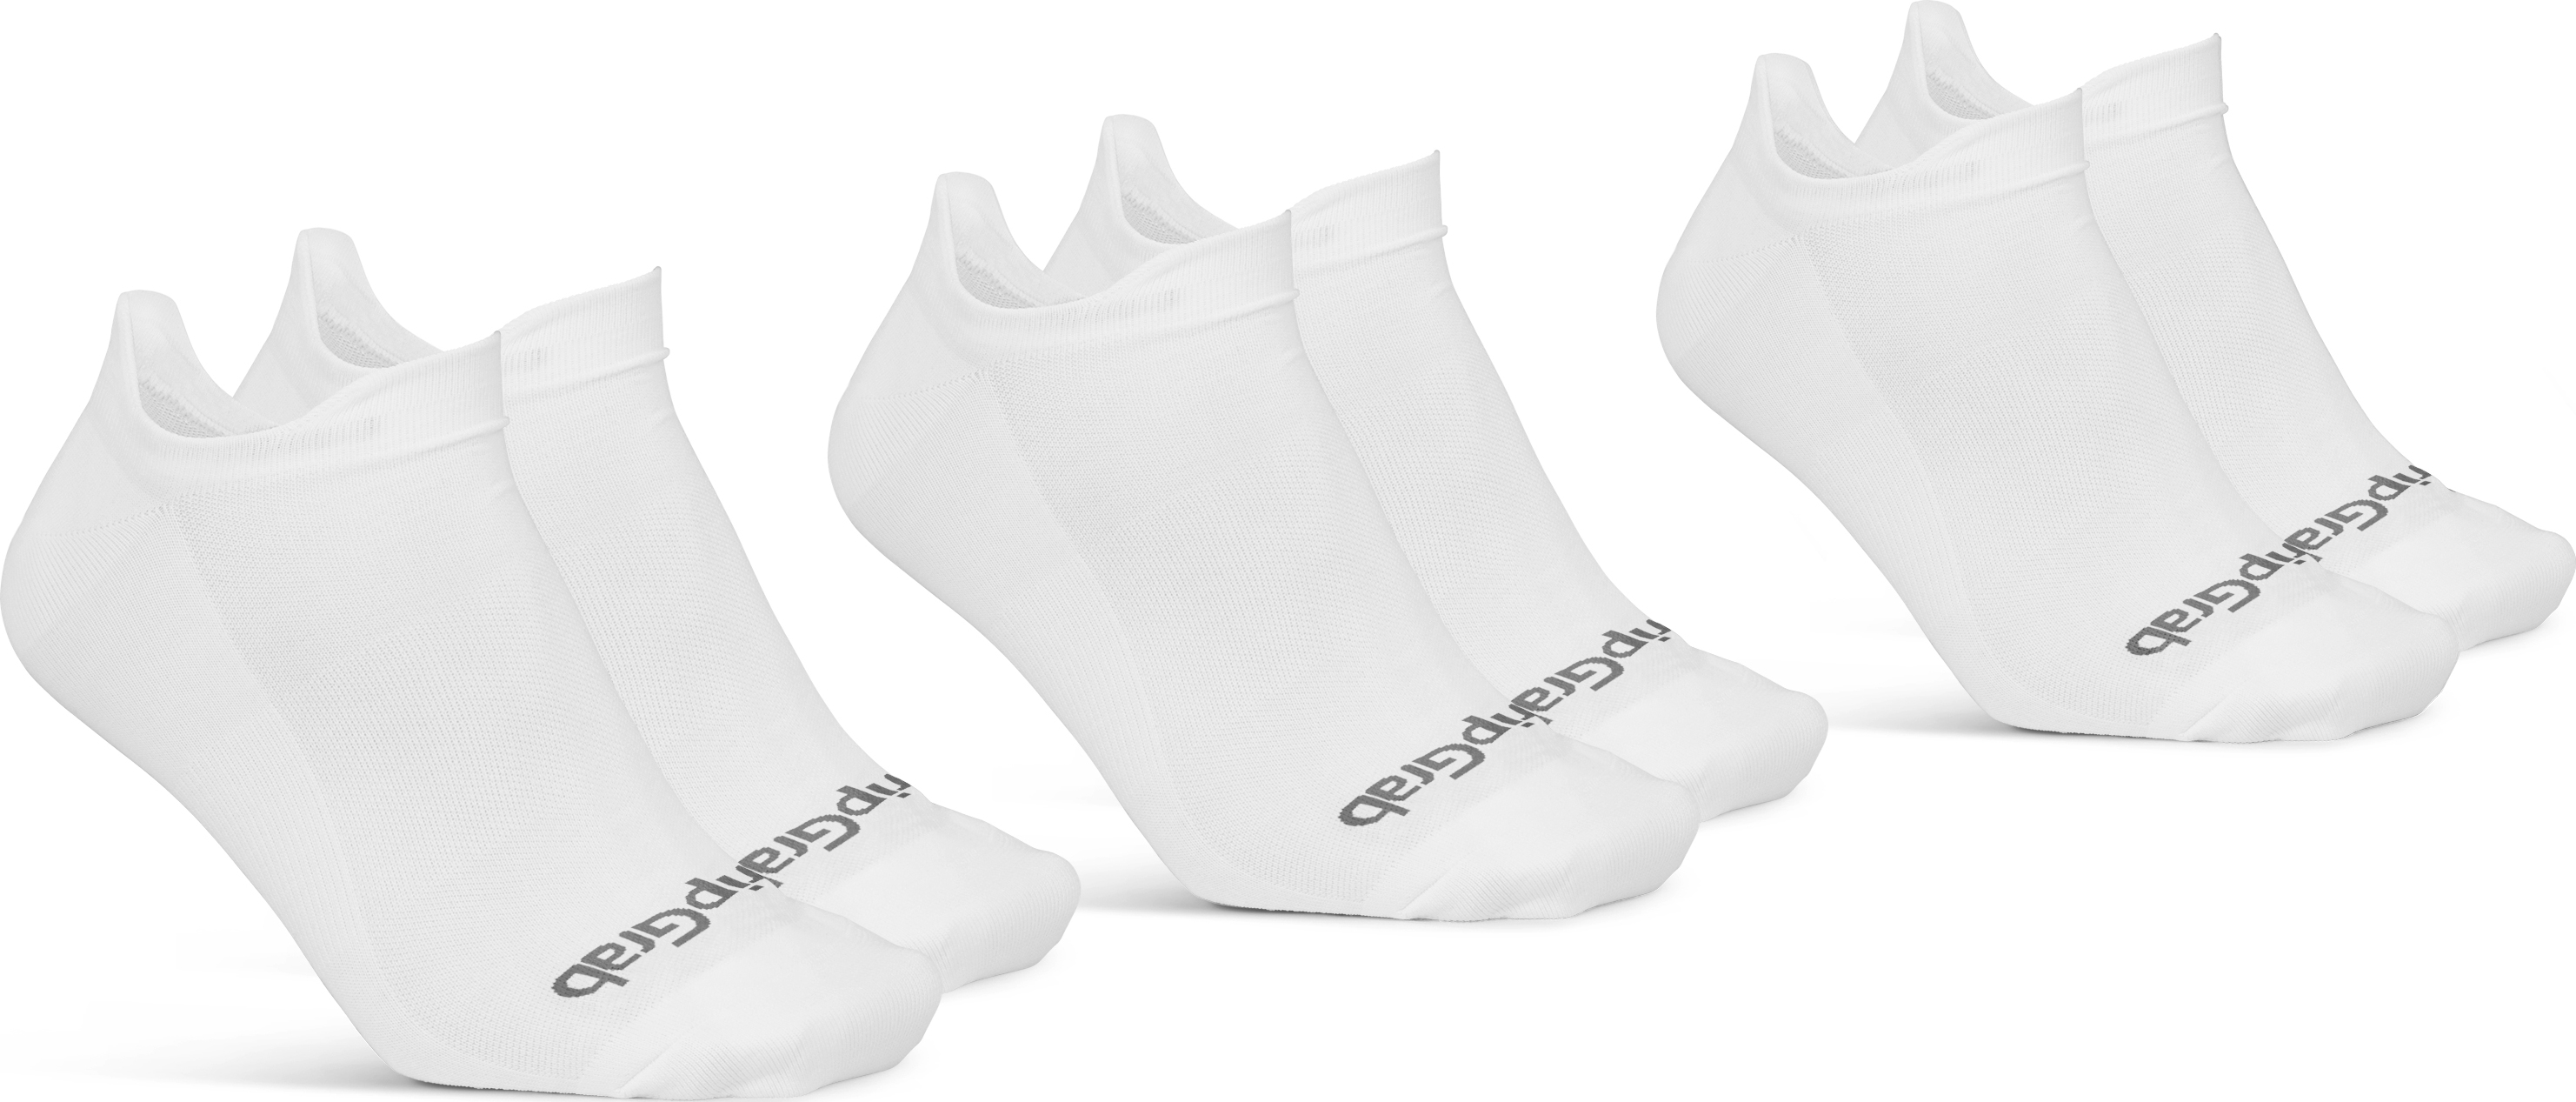 Gripgrab Classic No Show Summer Socks 3-Pack White